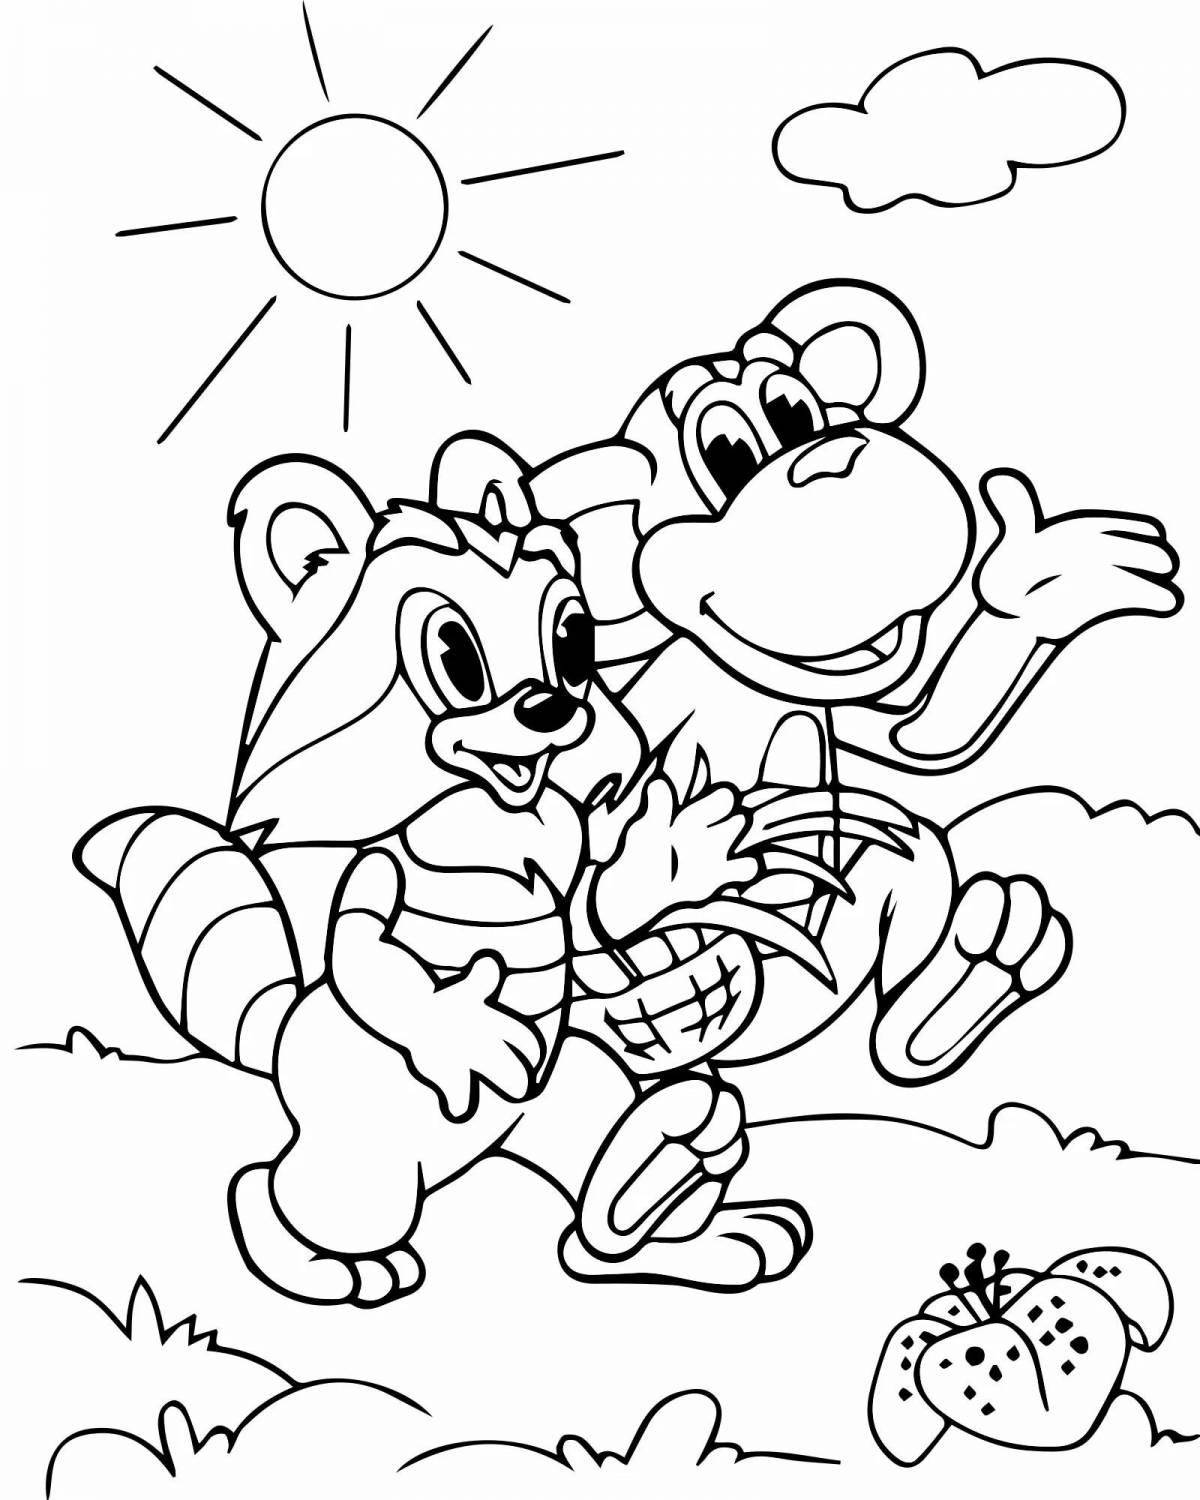 Whimsical cartoon characters coloring book for 4-5 year olds